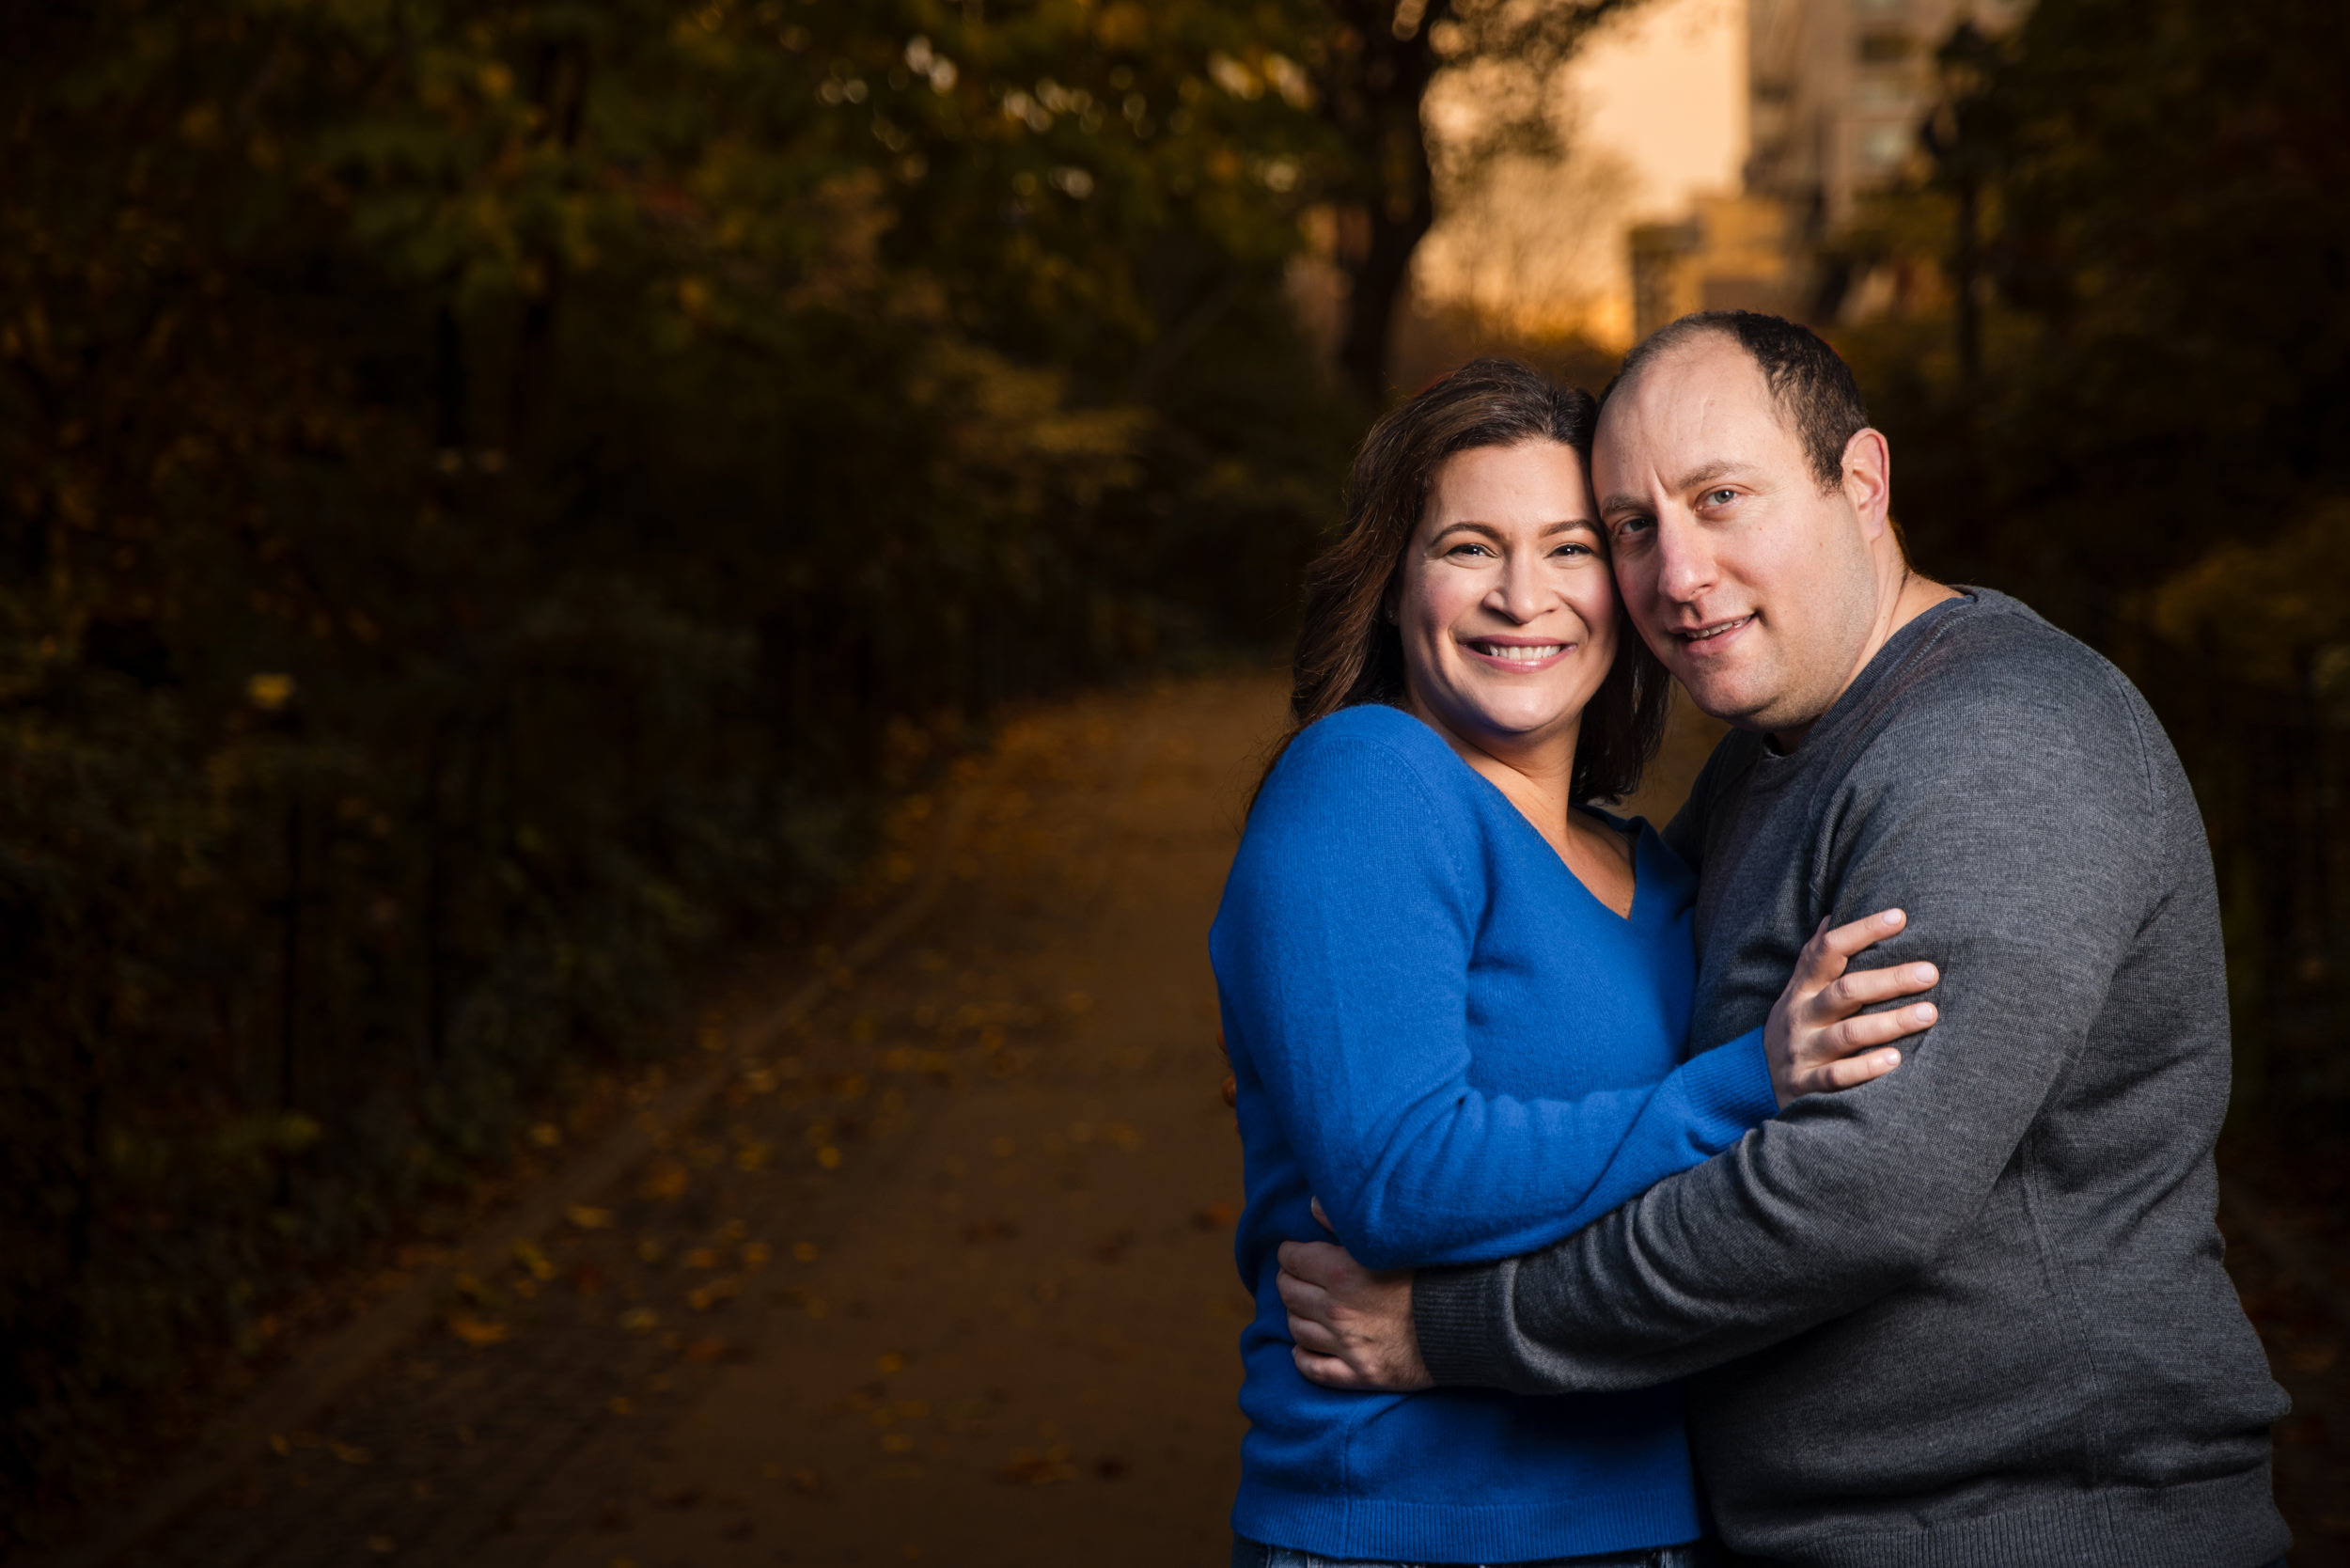 carl schurz park engagement photos in the fall